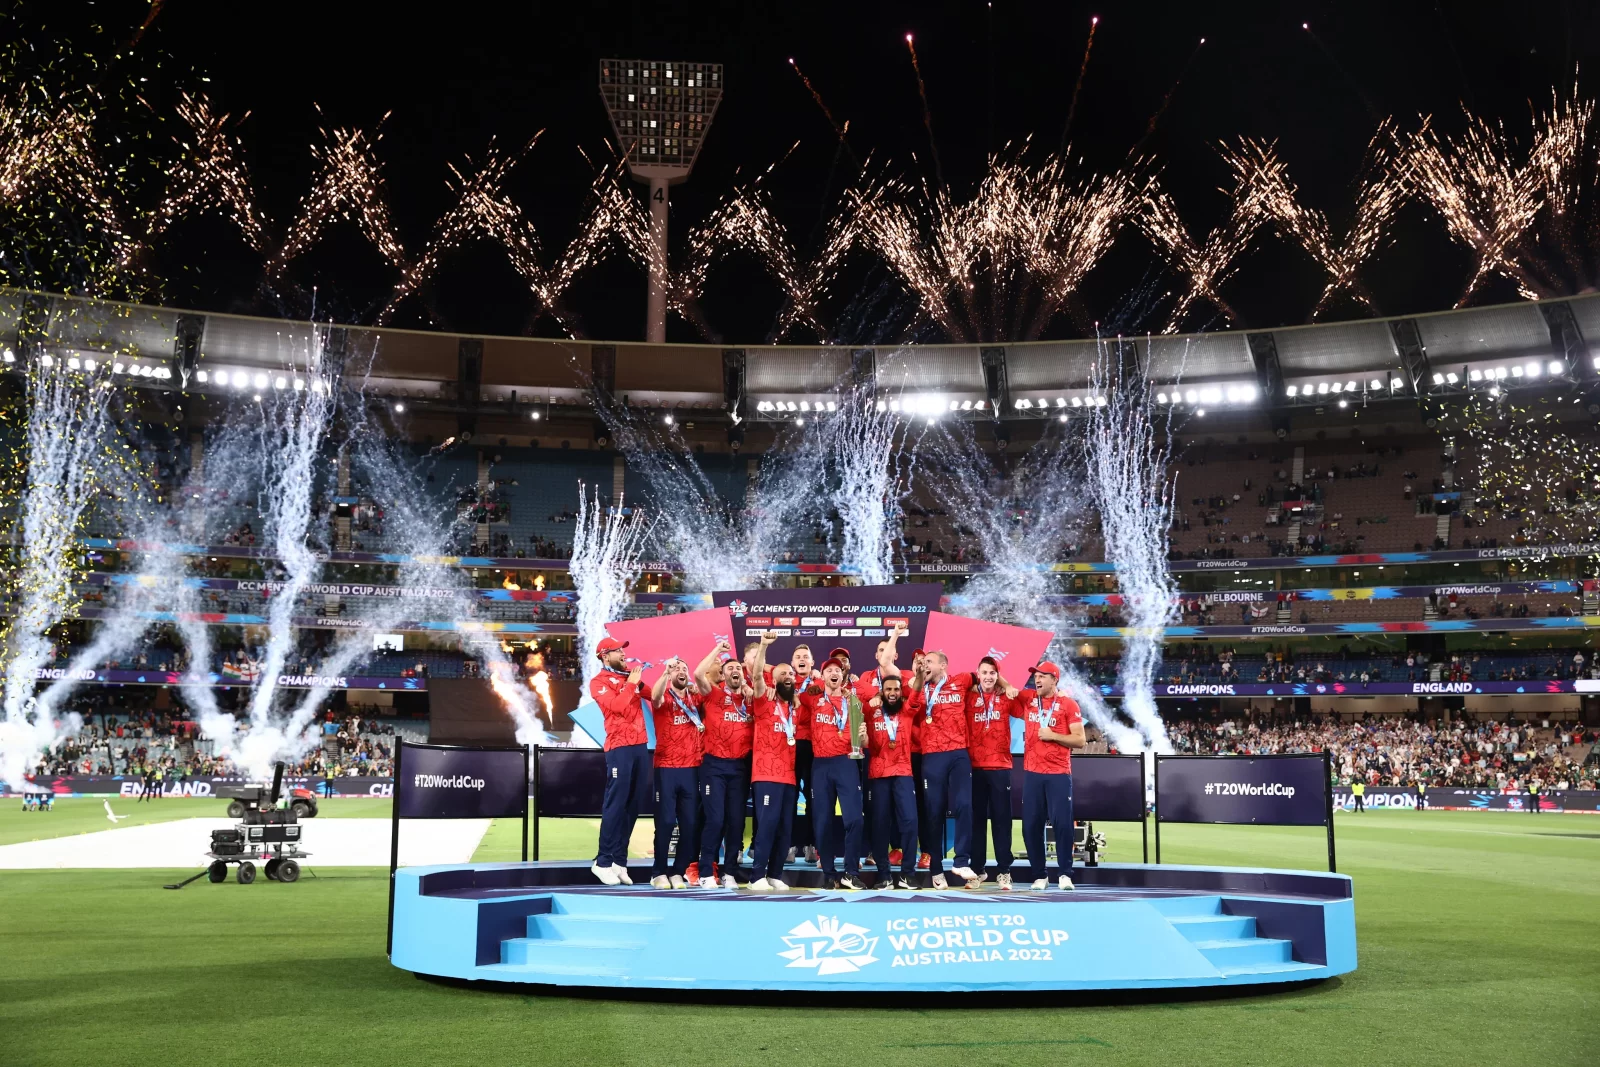 England lift the T20 World Cup Trophy